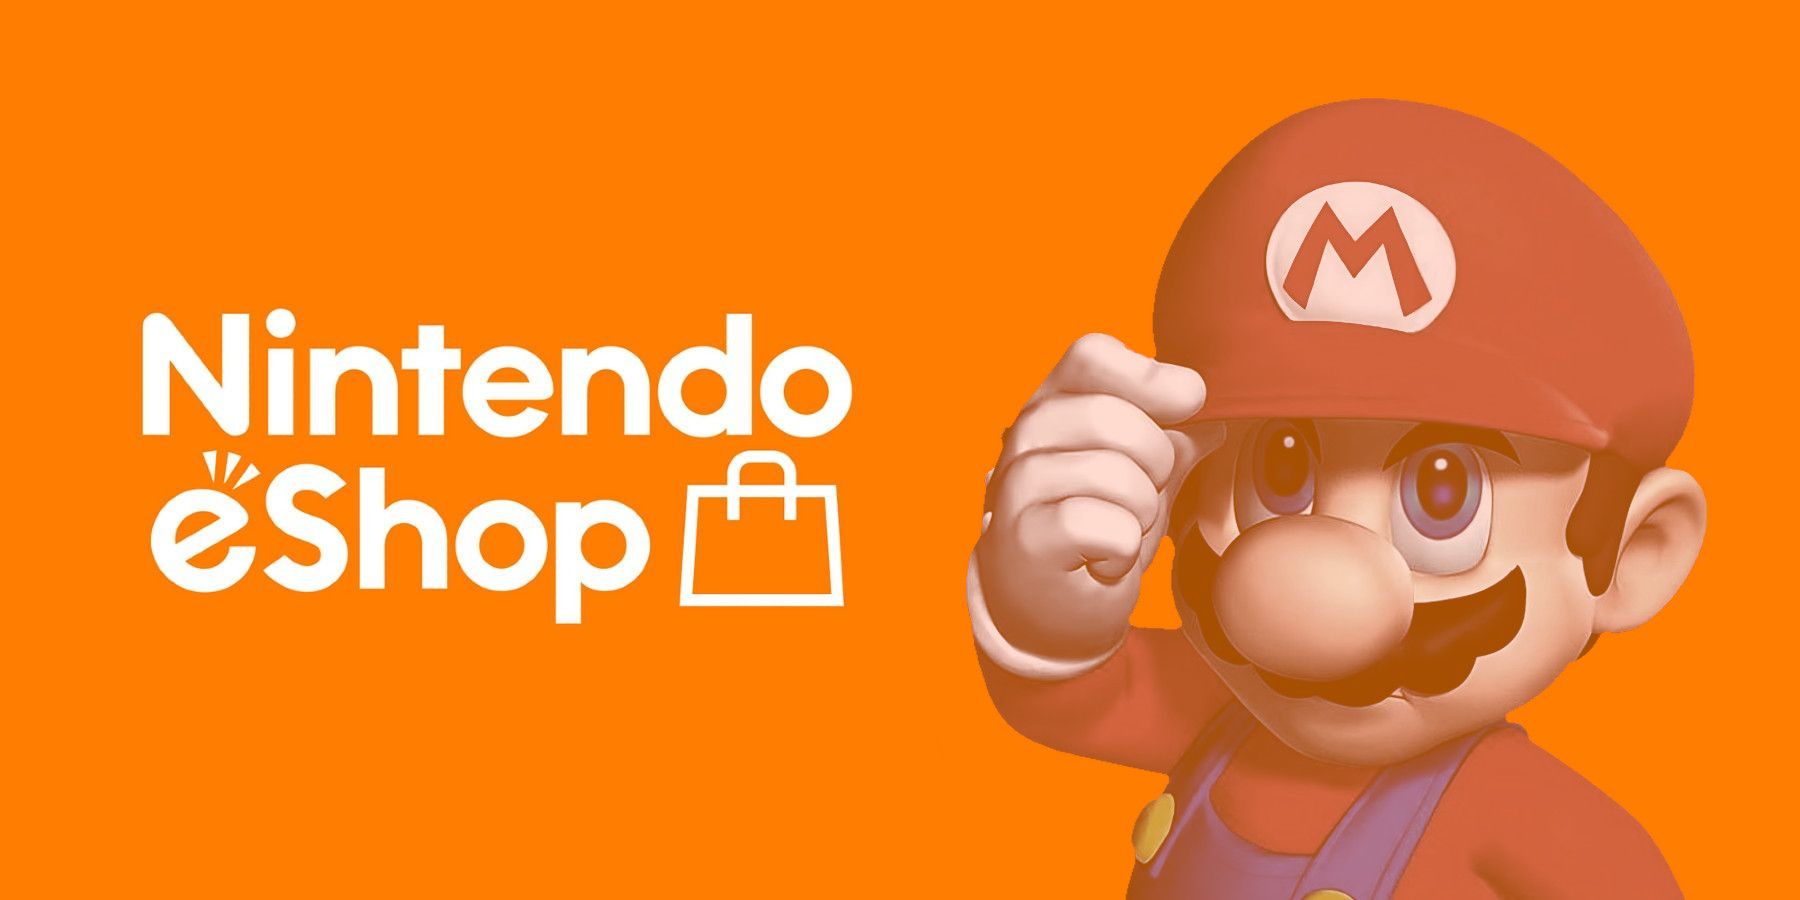 The end is near: Wii U, 3DS eShop ending credit card support in Japan